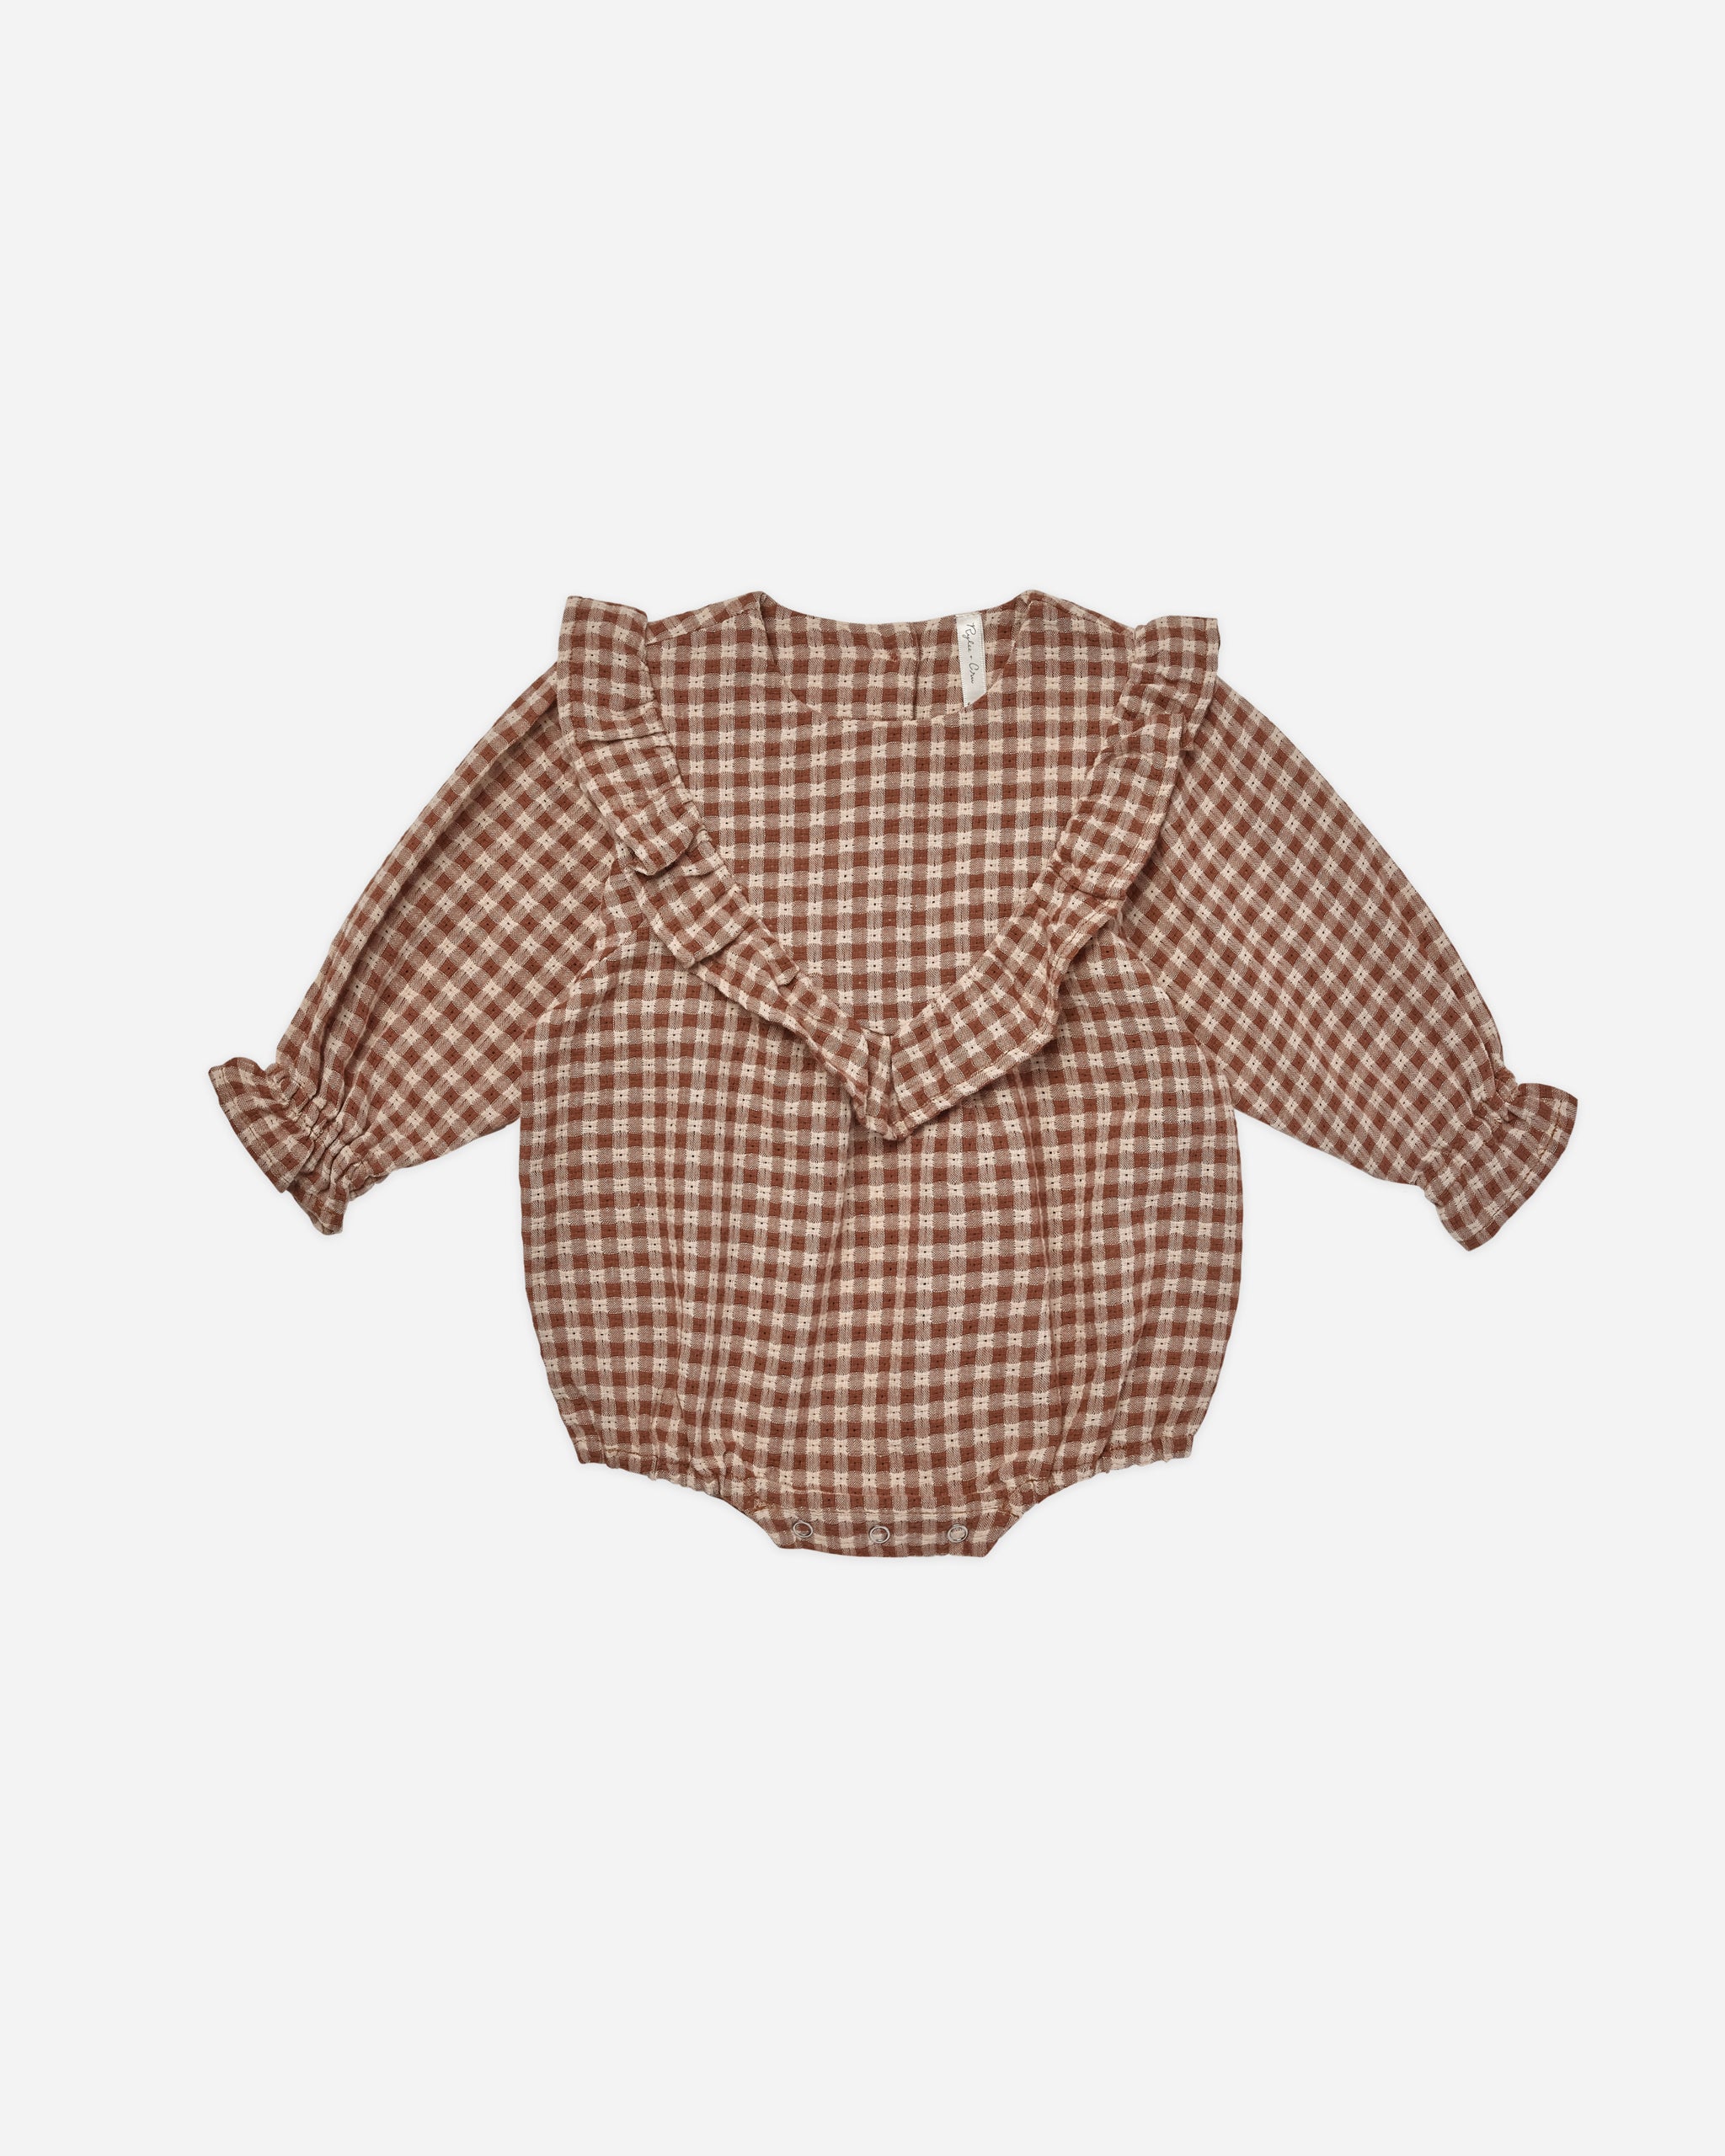 Winnie Romper || Brown Gingham - Rylee + Cru | Kids Clothes | Trendy Baby Clothes | Modern Infant Outfits |